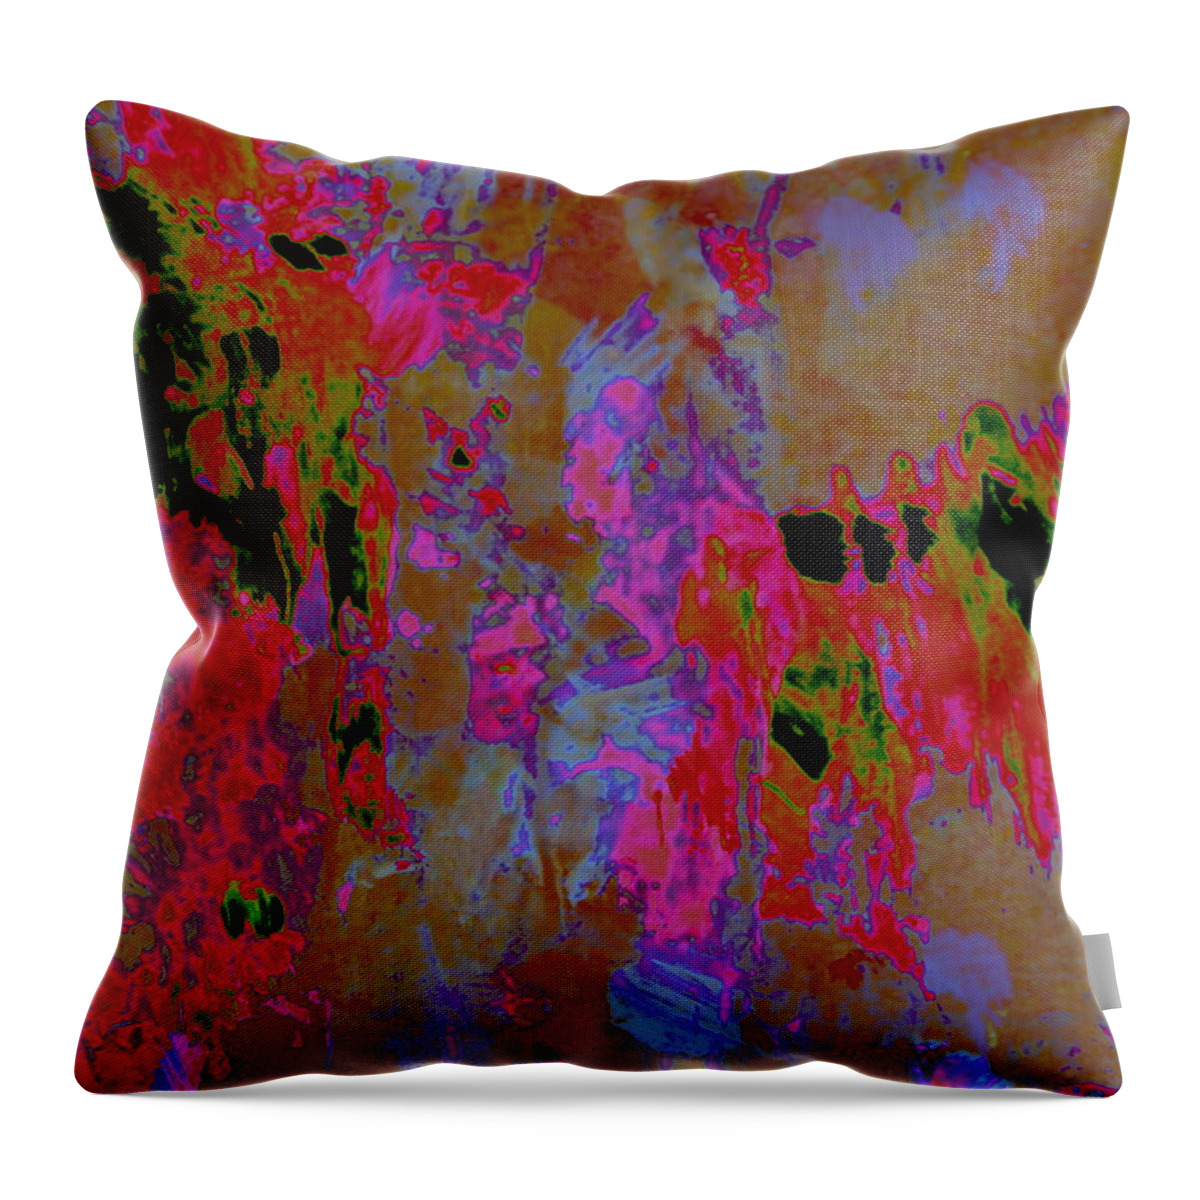 Abstract Expressionistic Painting In Gouache Throw Pillow featuring the painting The Creative Spirit 2 by Nancy Kane Chapman